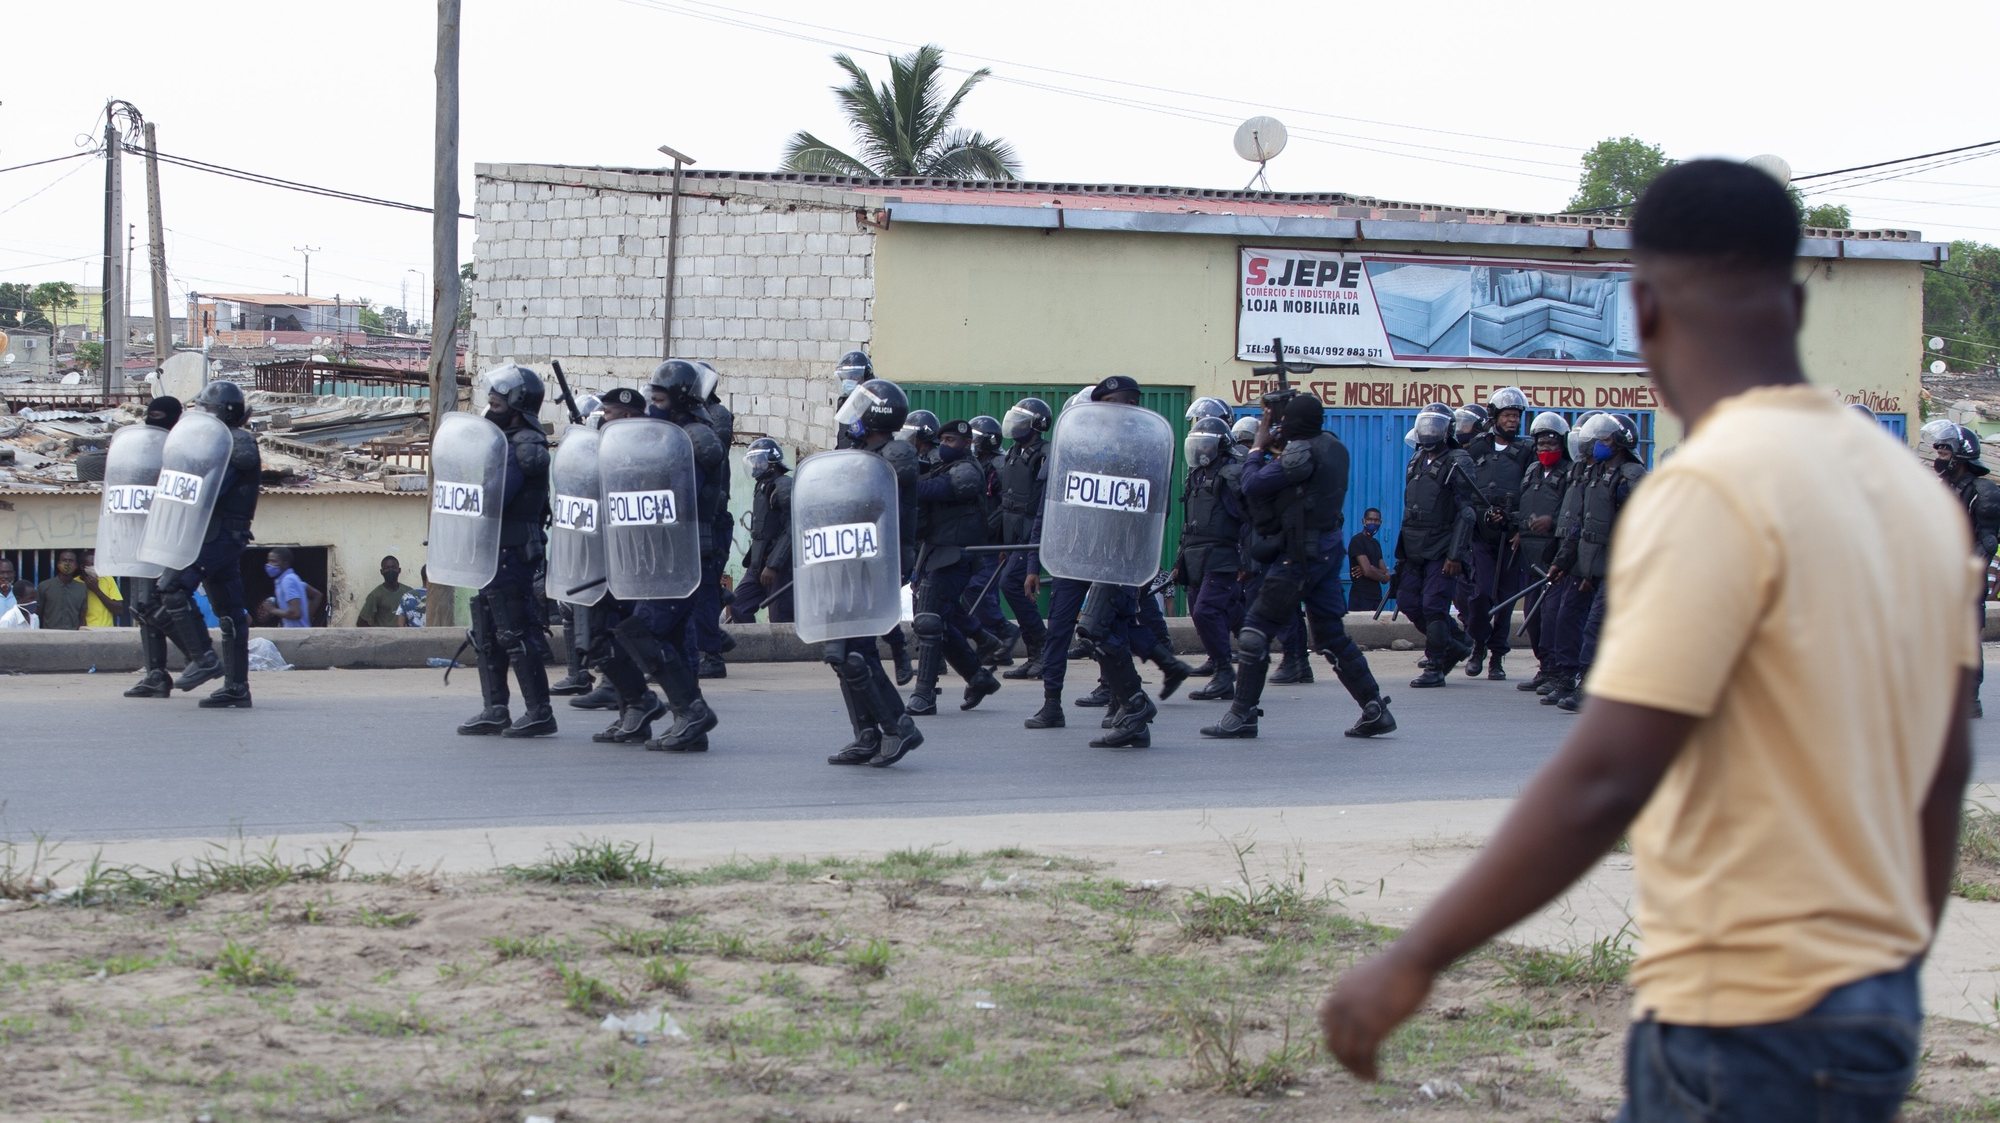 Clashes between group of young activists and police during an attempted demonstration to demand better living conditions and that a date be set for the first local elections during the celebrations of 45 years of the country&#039;s independence, in Luanda, Angola, 11 November 2020. The government of the province of Luanda prohibited the holding of this demonstration, citing several reasons, one of which is non-compliance with the Presidential Decree on the state of public calamity, which prevents gatherings of more than five people in the streets, as a measure to prevent and combat the spread of Covid-19. LUSA